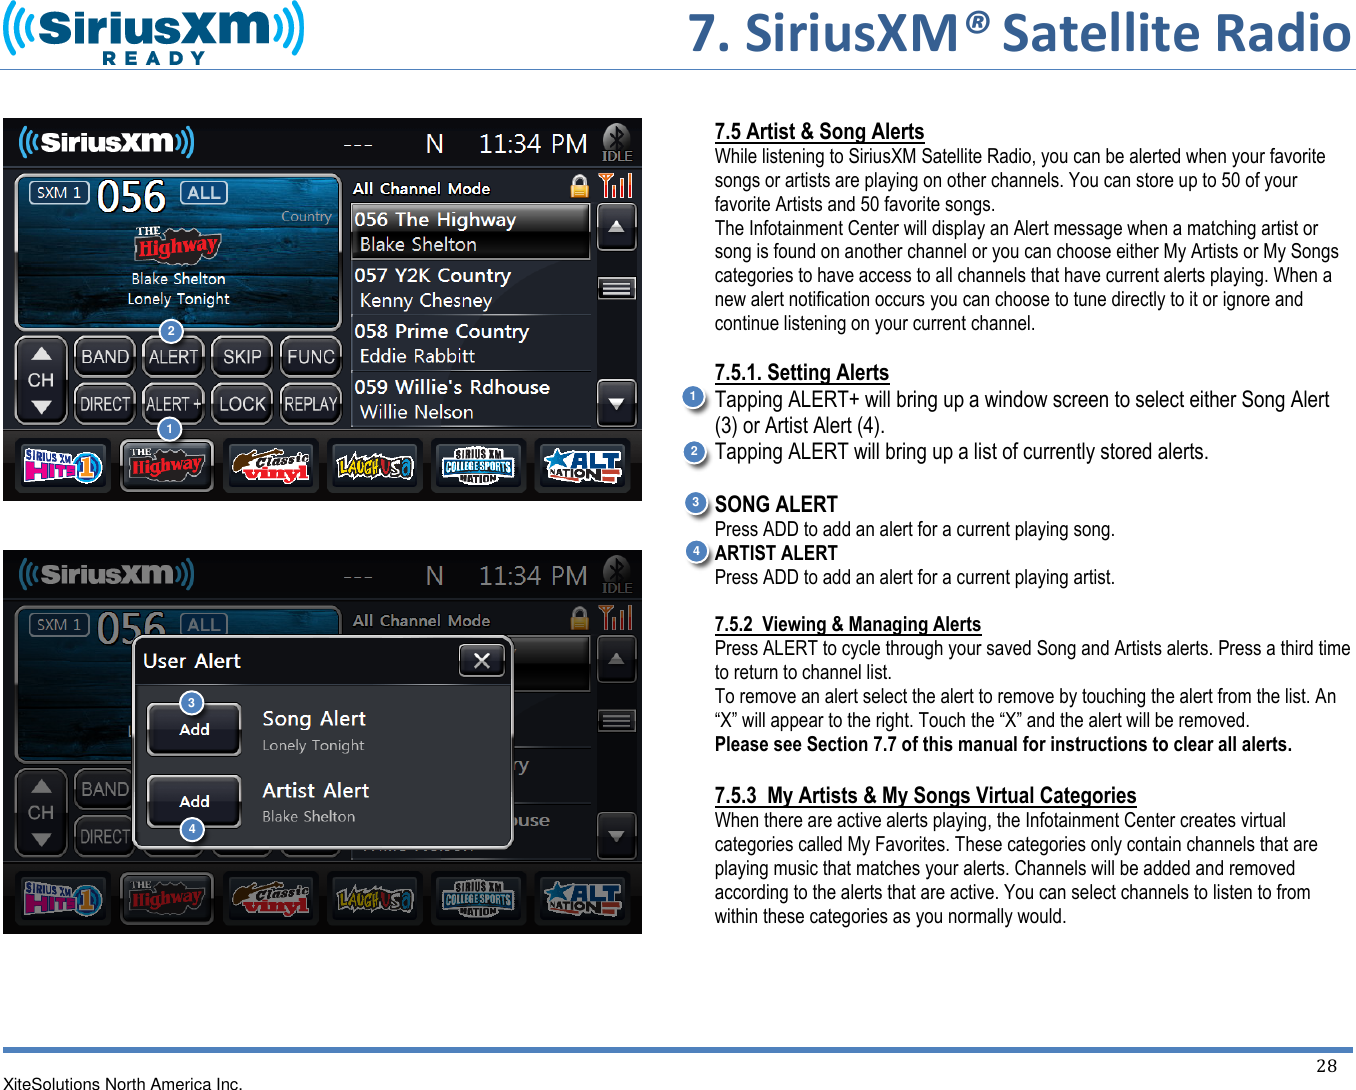       7. SiriusXM® Satellite Radio   XiteSolutions North America Inc.    28             7.5 Artist &amp; Song Alerts While listening to SiriusXM Satellite Radio, you can be alerted when your favorite songs or artists are playing on other channels. You can store up to 50 of your favorite Artists and 50 favorite songs.  The Infotainment Center will display an Alert message when a matching artist or song is found on another channel or you can choose either My Artists or My Songs categories to have access to all channels that have current alerts playing. When a new alert notification occurs you can choose to tune directly to it or ignore and continue listening on your current channel.  7.5.1. Setting Alerts Tapping ALERT+ will bring up a window screen to select either Song Alert (3) or Artist Alert (4). Tapping ALERT will bring up a list of currently stored alerts.   SONG ALERT Press ADD to add an alert for a current playing song. ARTIST ALERT Press ADD to add an alert for a current playing artist.   7.5.2  Viewing &amp; Managing Alerts Press ALERT to cycle through your saved Song and Artists alerts. Press a third time to return to channel list. To remove an alert select the alert to remove by touching the alert from the list. An “X” will appear to the right. Touch the “X” and the alert will be removed. Please see Section 7.7 of this manual for instructions to clear all alerts.  7.5.3  My Artists &amp; My Songs Virtual Categories When there are active alerts playing, the Infotainment Center creates virtual categories called My Favorites. These categories only contain channels that are playing music that matches your alerts. Channels will be added and removed according to the alerts that are active. You can select channels to listen to from within these categories as you normally would.     1 2 1 2 3 4 3 4 